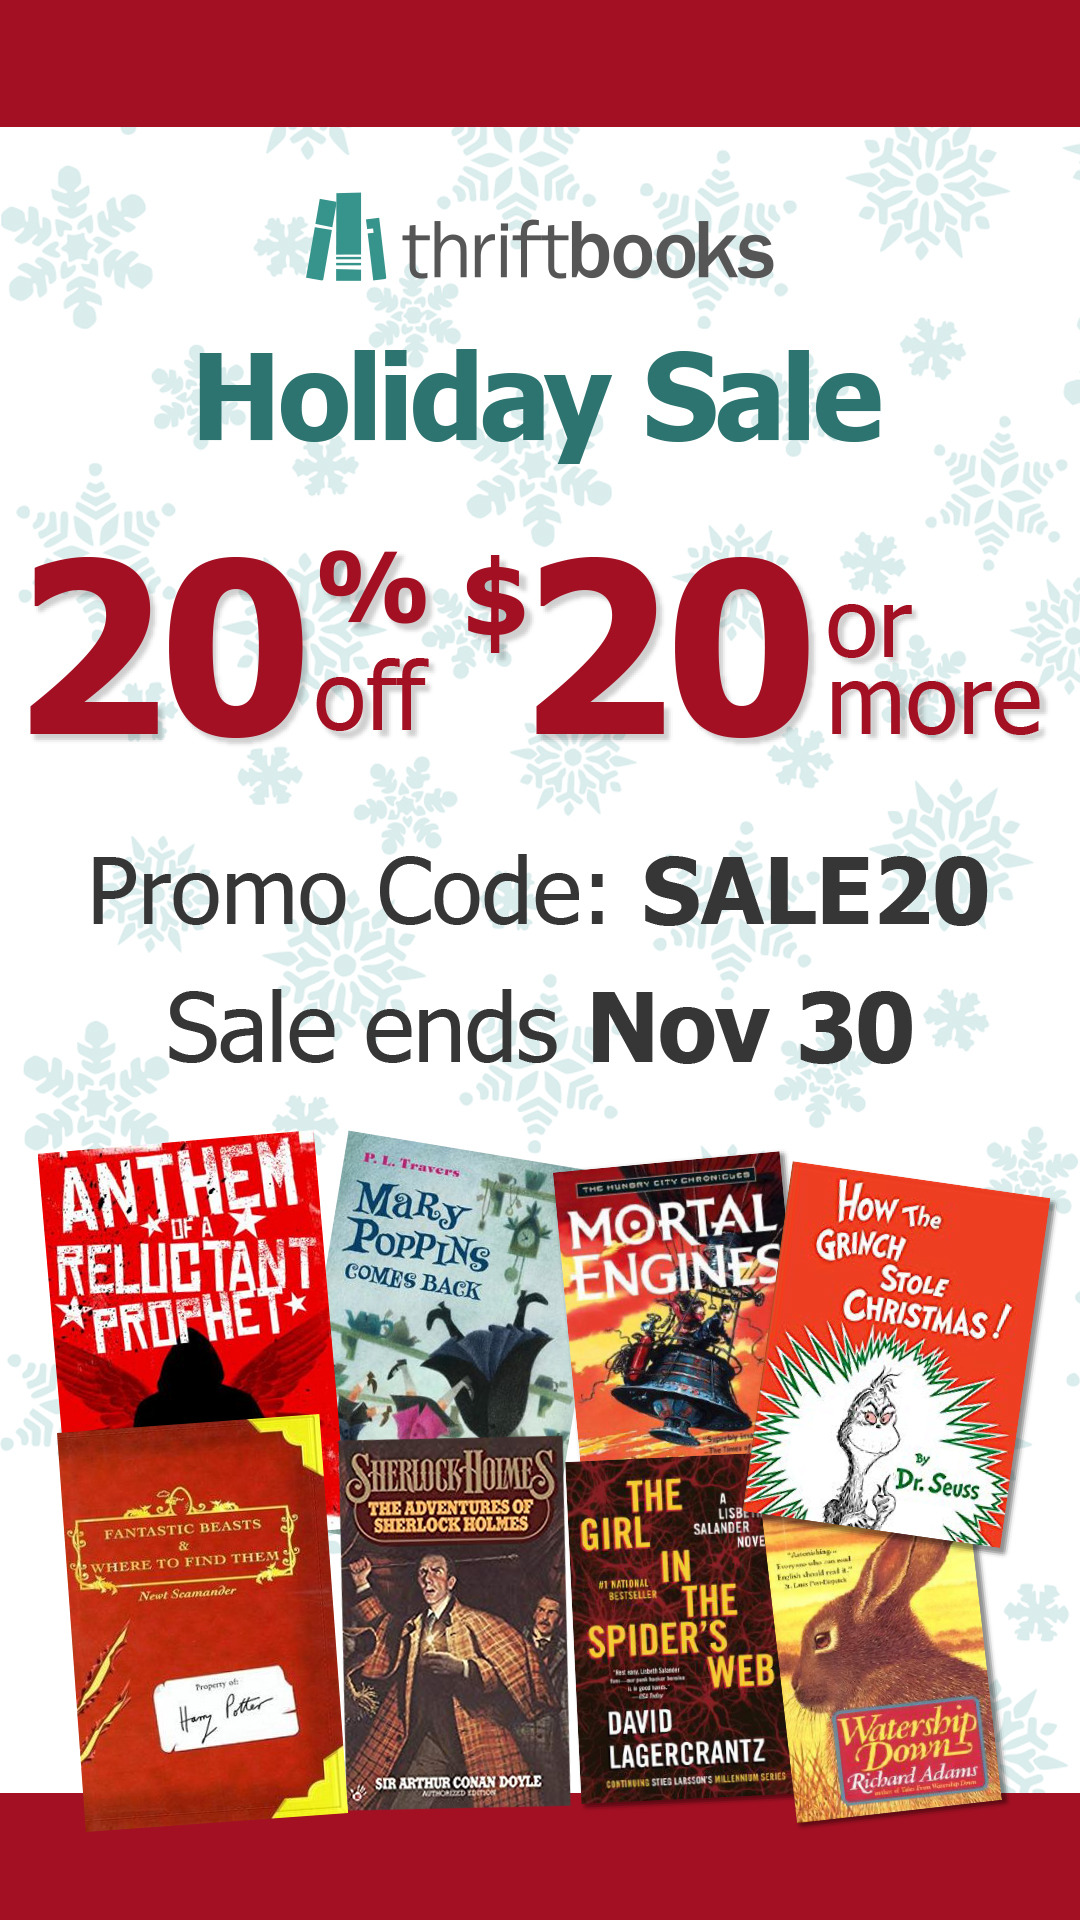 ATTENTION: BOOKS ON SALE!!
Kick off the holidays early with ThriftBooks! Get 20% off any order of used books or used DVDs that is $20 or more. Use code SALE20 to redeem, the offer runs through November 30. Shop these titles and more right on...